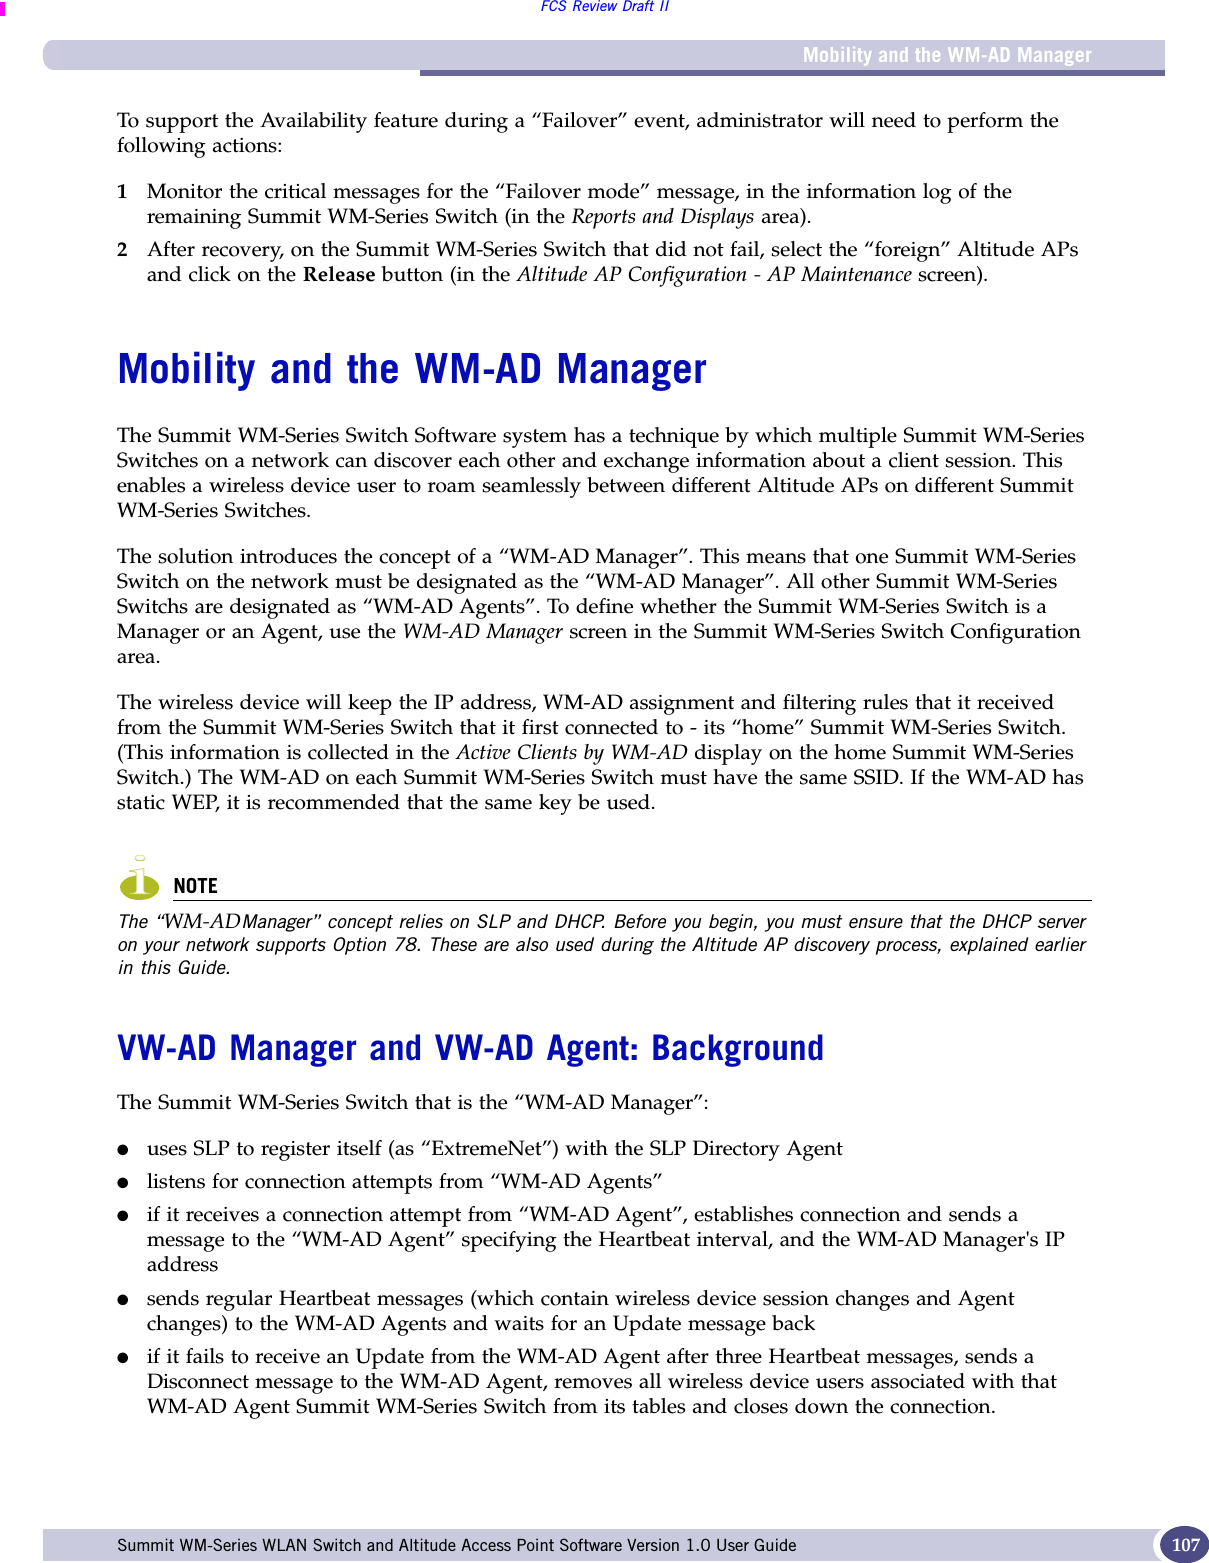 Mobility and the WM-AD ManagerFCS Review Draft IISummit WM-Series WLAN Switch and Altitude Access Point Software Version 1.0 User Guide 107To support the Availability feature during a “Failover” event, administrator will need to perform the following actions:1Monitor the critical messages for the “Failover mode” message, in the information log of the remaining Summit WM-Series Switch (in the Reports and Displays area).2After recovery, on the Summit WM-Series Switch that did not fail, select the “foreign” Altitude APs and click on the Release button (in the Altitude AP Configuration - AP Maintenance screen).Mobility and the WM-AD ManagerThe Summit WM-Series Switch Software system has a technique by which multiple Summit WM-Series Switches on a network can discover each other and exchange information about a client session. This enables a wireless device user to roam seamlessly between different Altitude APs on different Summit WM-Series Switches. The solution introduces the concept of a “WM-AD Manager”. This means that one Summit WM-Series Switch on the network must be designated as the “WM-AD Manager”. All other Summit WM-Series Switchs are designated as “WM-AD Agents”. To define whether the Summit WM-Series Switch is a Manager or an Agent, use the WM-AD Manager screen in the Summit WM-Series Switch Configuration area.The wireless device will keep the IP address, WM-AD assignment and filtering rules that it received from the Summit WM-Series Switch that it first connected to - its “home” Summit WM-Series Switch. (This information is collected in the Active Clients by WM-AD display on the home Summit WM-Series Switch.) The WM-AD on each Summit WM-Series Switch must have the same SSID. If the WM-AD has static WEP, it is recommended that the same key be used.NOTEThe “WM-ADManager” concept relies on SLP and DHCP. Before you begin, you must ensure that the DHCP server on your network supports Option 78. These are also used during the Altitude AP discovery process, explained earlier in this Guide.VW-AD Manager and VW-AD Agent: BackgroundThe Summit WM-Series Switch that is the “WM-AD Manager”:●uses SLP to register itself (as “ExtremeNet”) with the SLP Directory Agent●listens for connection attempts from “WM-AD Agents”●if it receives a connection attempt from “WM-AD Agent”, establishes connection and sends a message to the “WM-AD Agent” specifying the Heartbeat interval, and the WM-AD Manager&apos;s IP address●sends regular Heartbeat messages (which contain wireless device session changes and Agent changes) to the WM-AD Agents and waits for an Update message back●if it fails to receive an Update from the WM-AD Agent after three Heartbeat messages, sends a Disconnect message to the WM-AD Agent, removes all wireless device users associated with that WM-AD Agent Summit WM-Series Switch from its tables and closes down the connection.